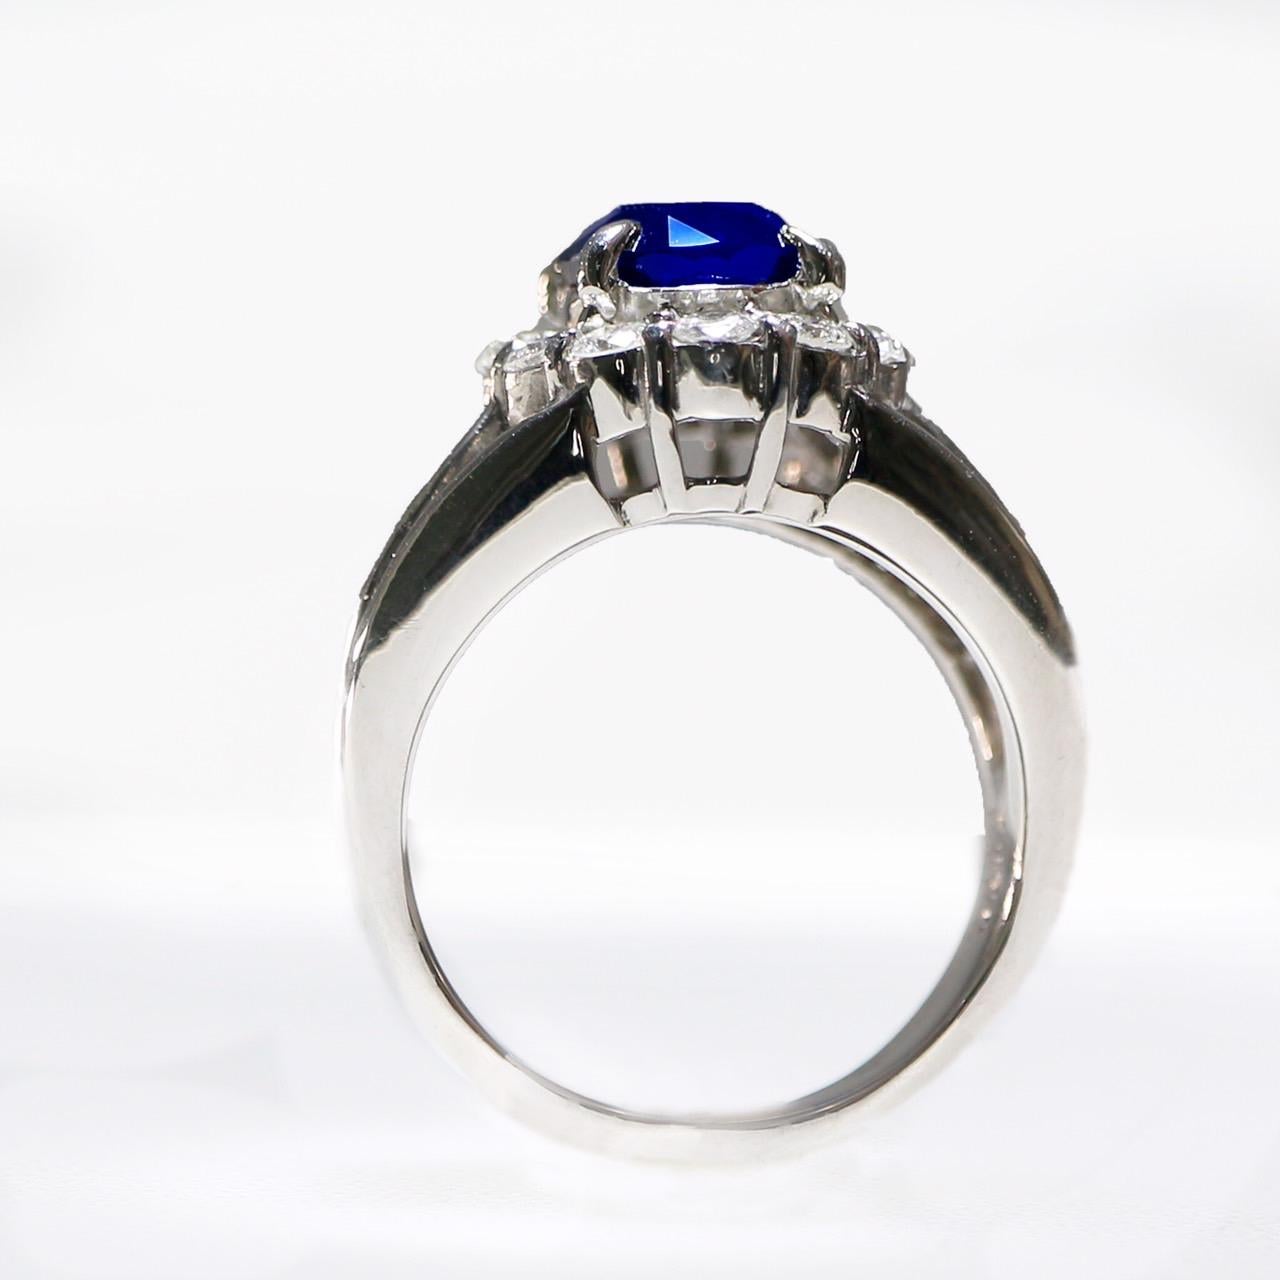 Certified PT900 3.30 ct Royal Blue Sapphire Art Deco Engagement Ring For Sale 4